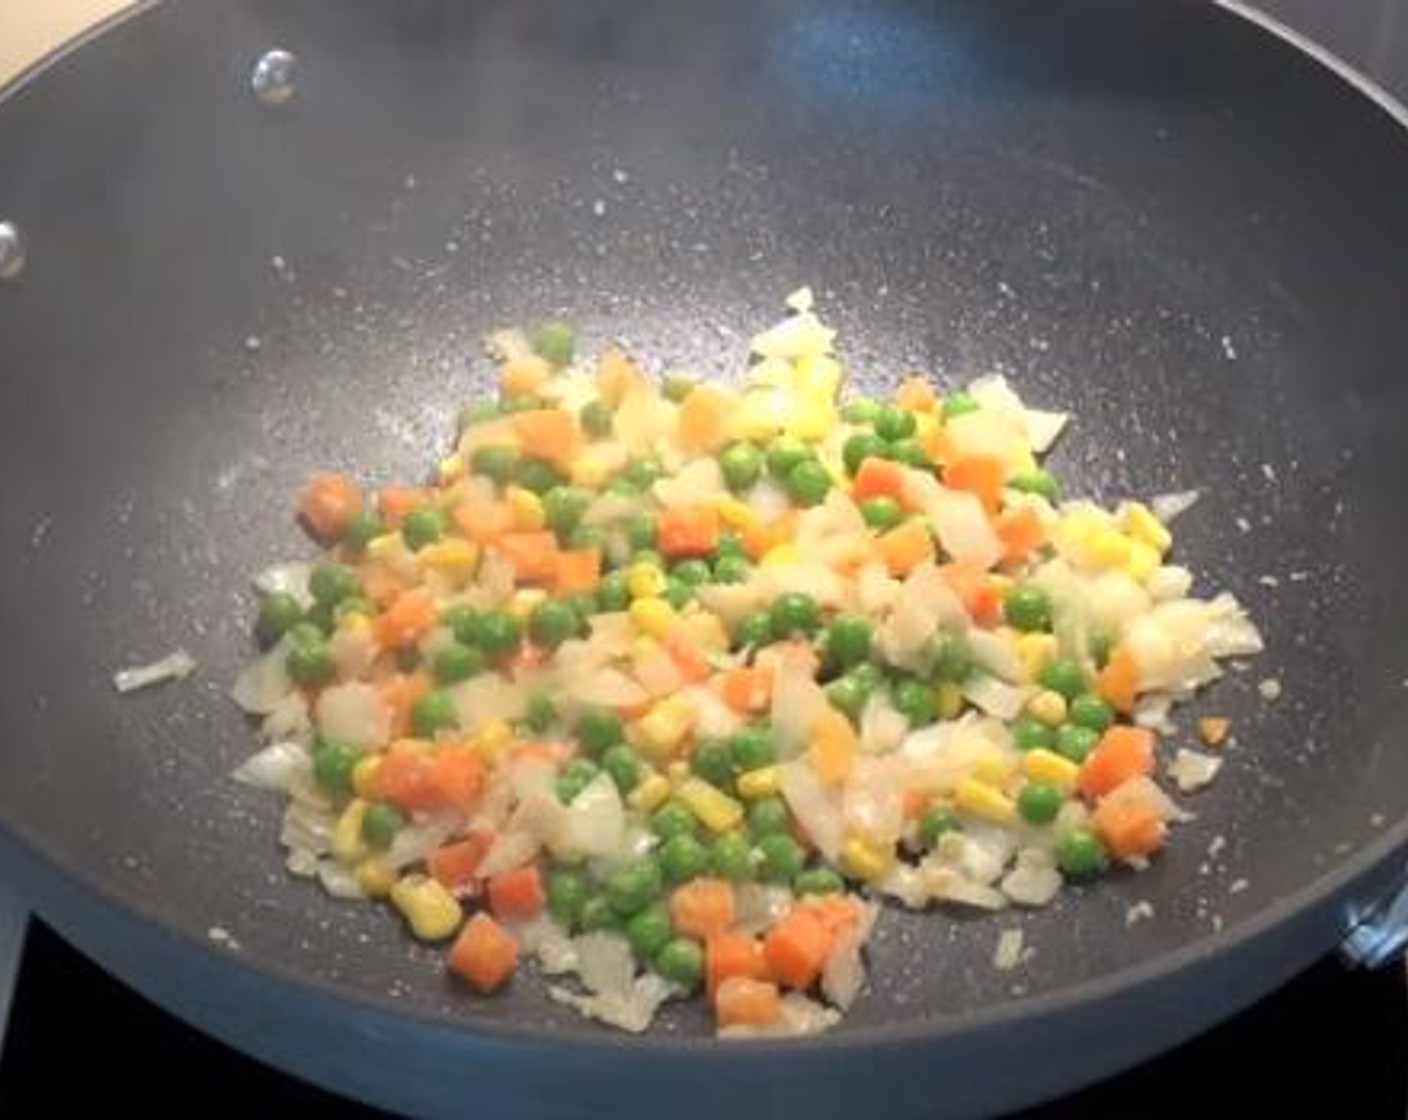 step 2 Grease wok one more time, and add in the Yellow Onion (1), Garlic (1 clove) and Frozen Mixed Vegetables (1 cup).Cook everything well together.